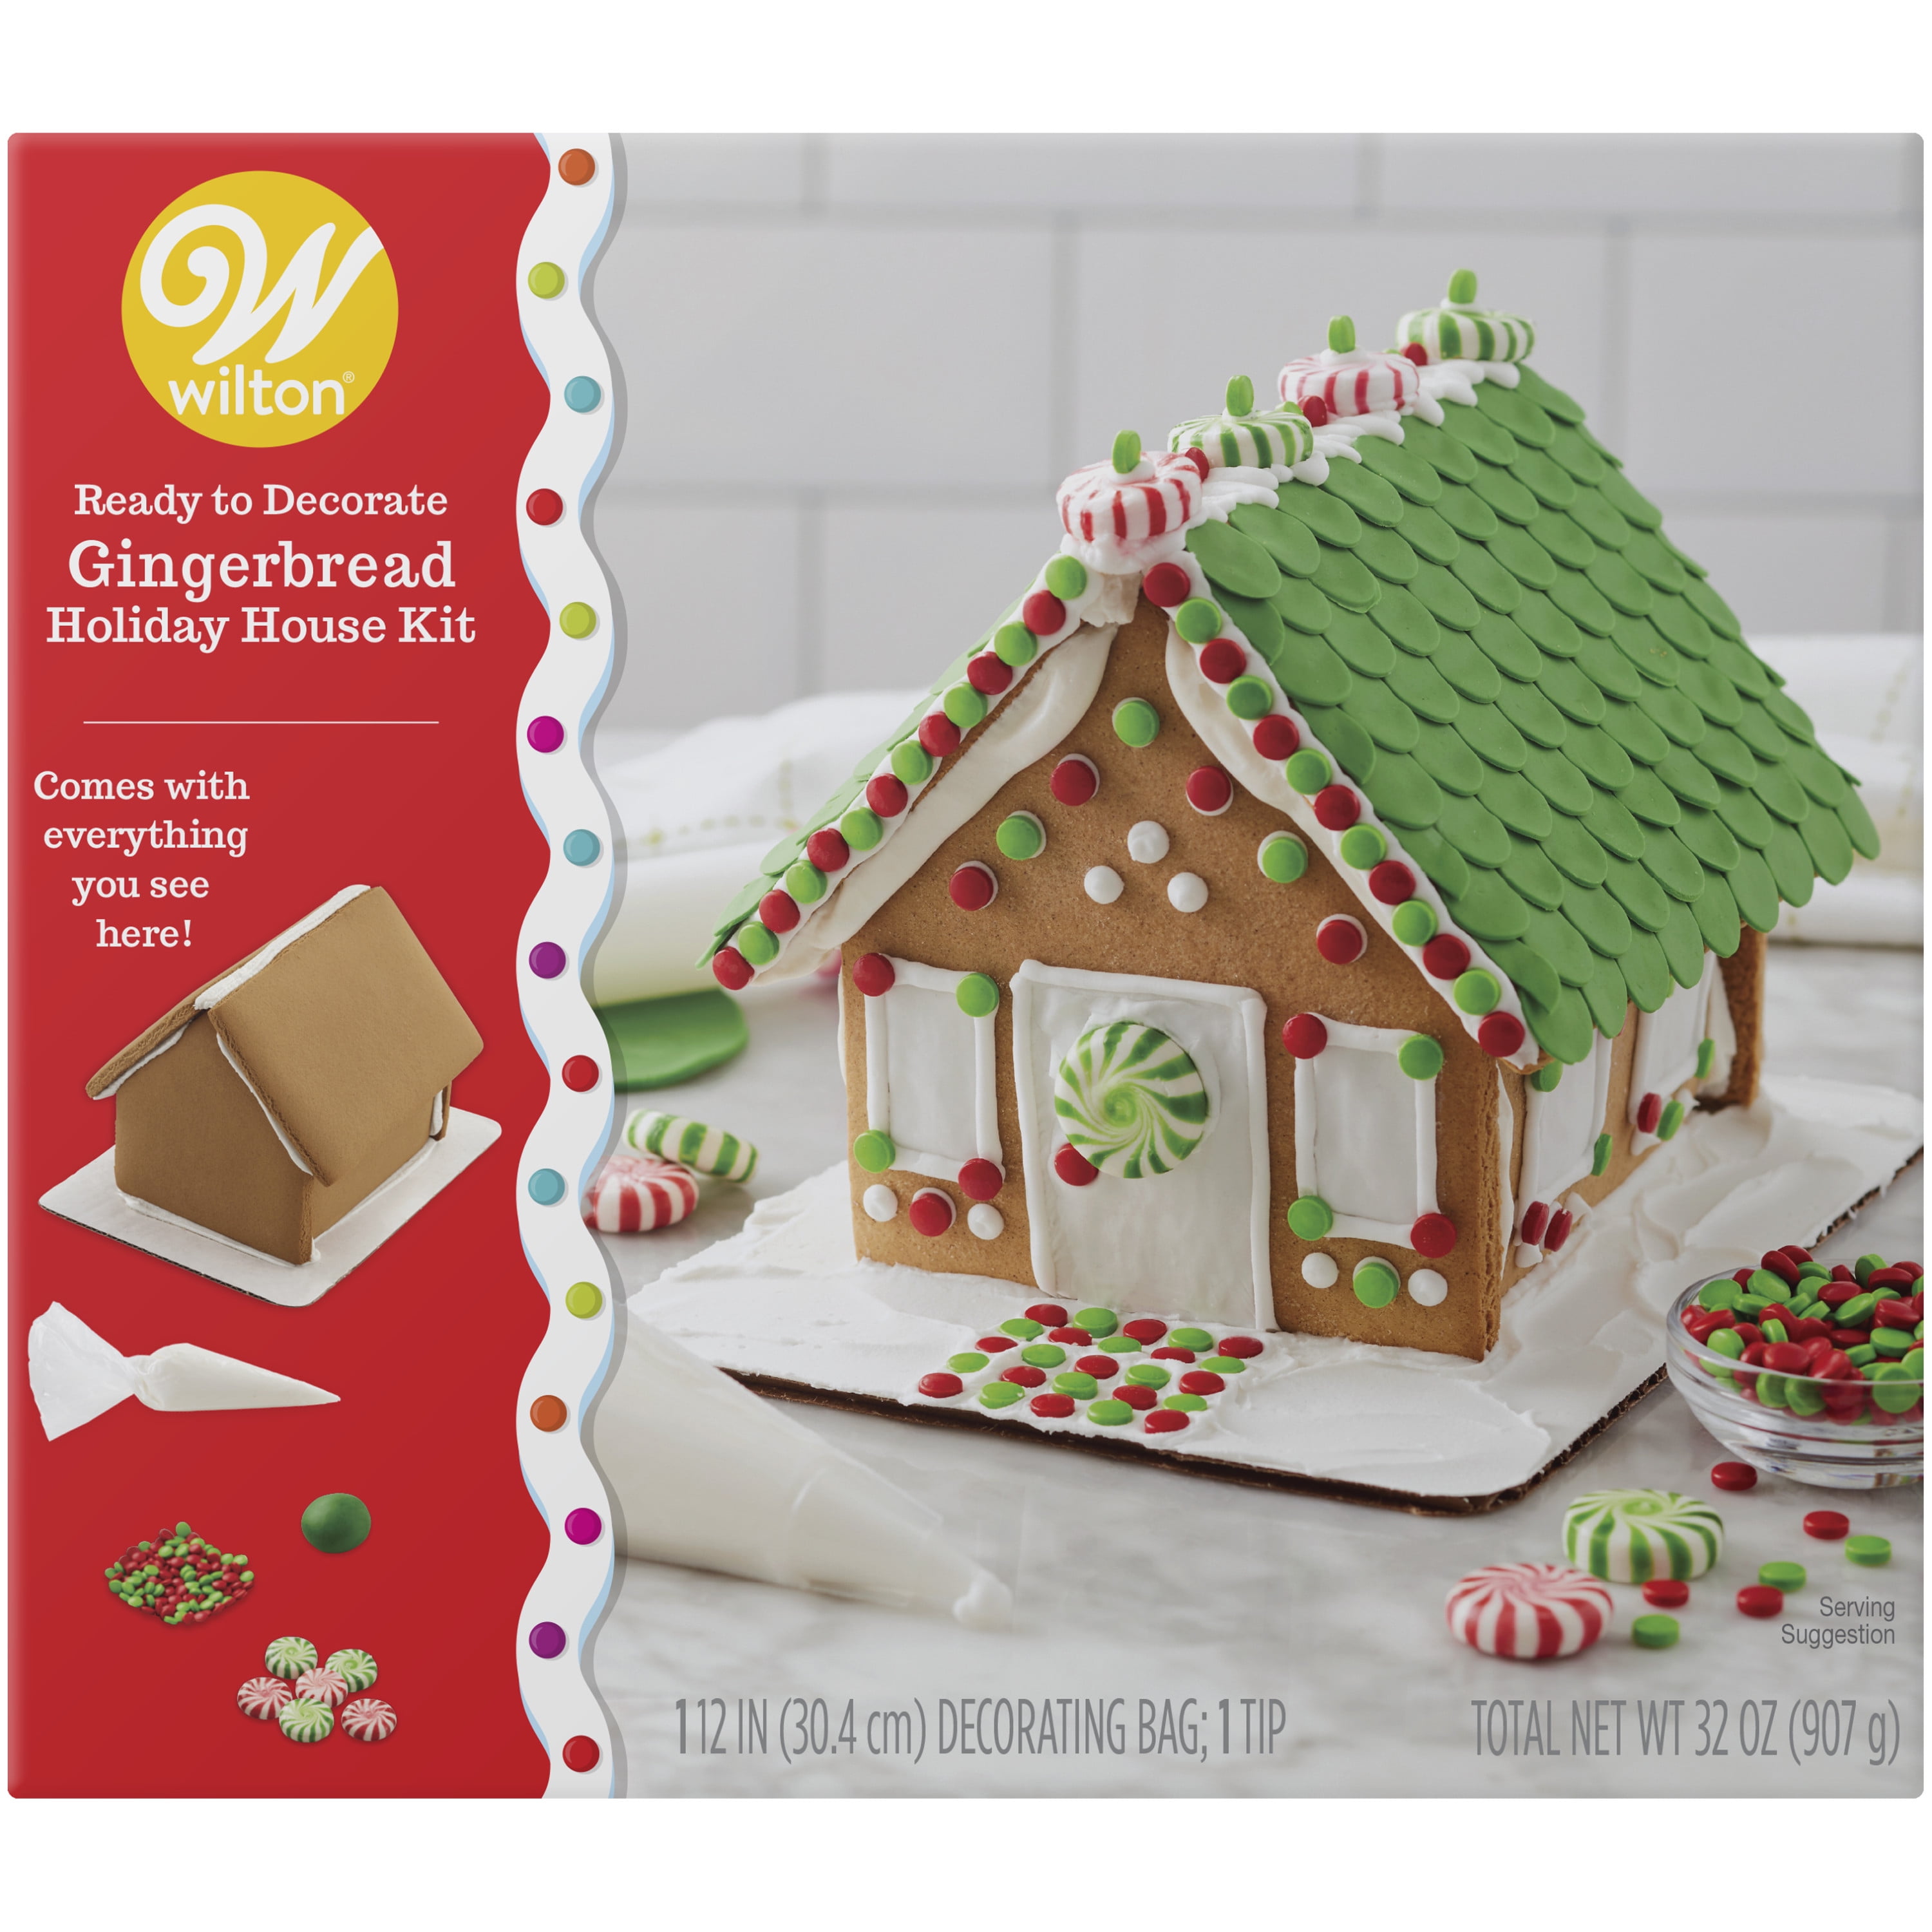 Includes: House Icing Christmas Fun Decorating Kit Pre-Assembled Fondant Ready to Decorate Candies Decorating Bag & Tip Wilton Christmas Gingerbread House Kit Bundled with Extra Candy! 